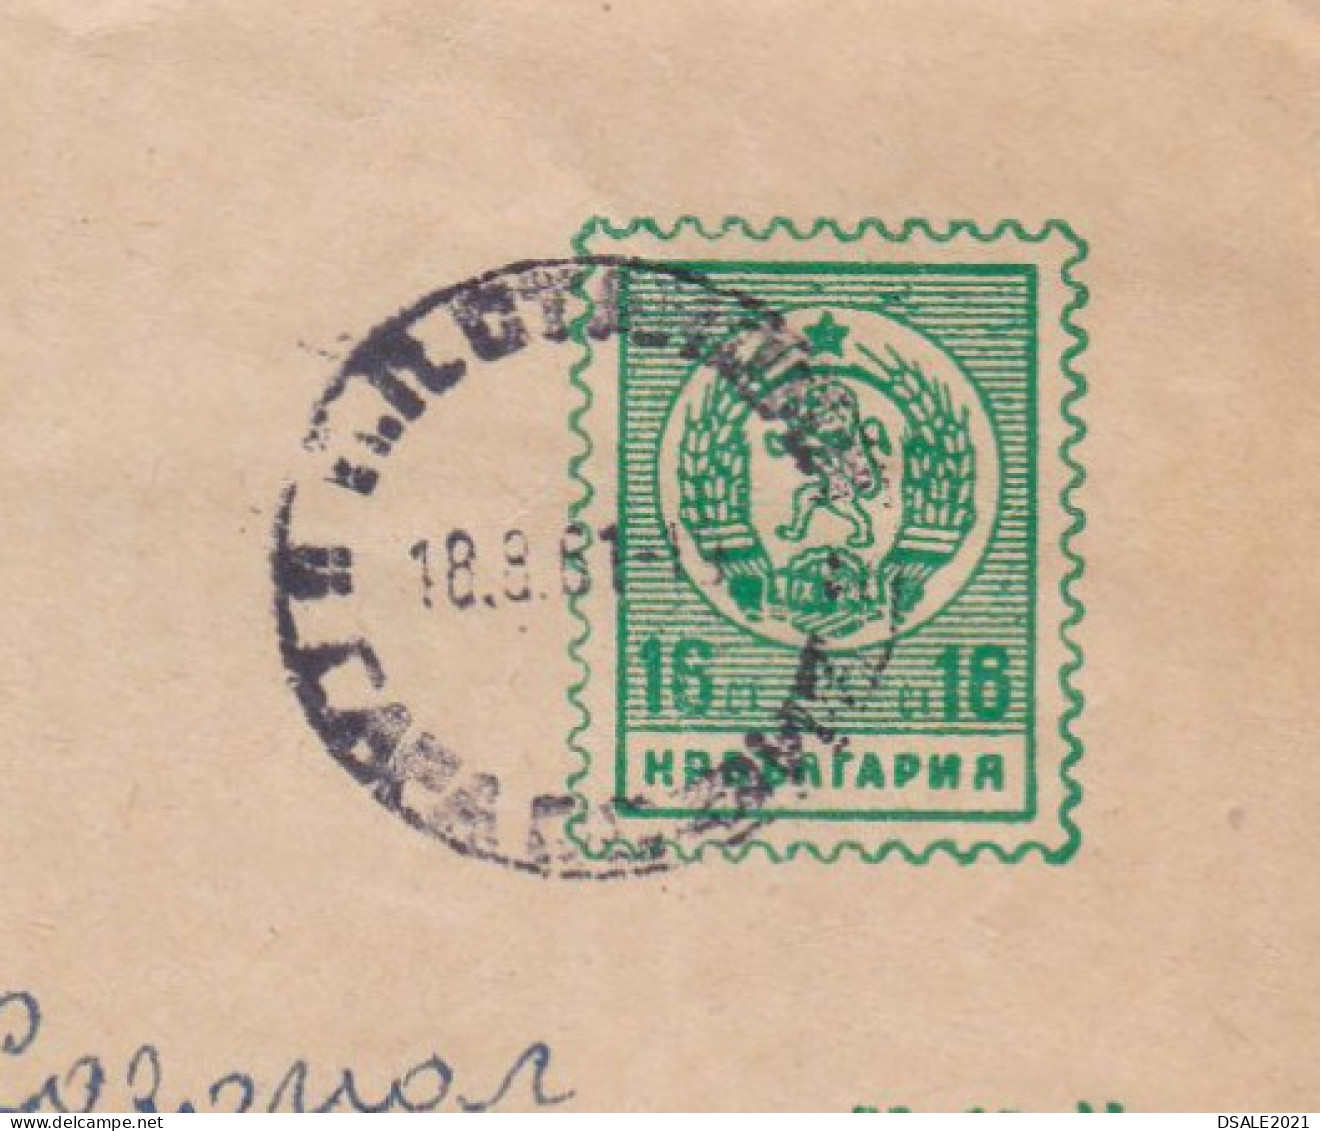 Bulgaria Bulgarie 1960s Postal Stationery Cover - 16St. (PLANT), Entier, Sent SOFIA Railway Station Post Office (68207) - Briefe